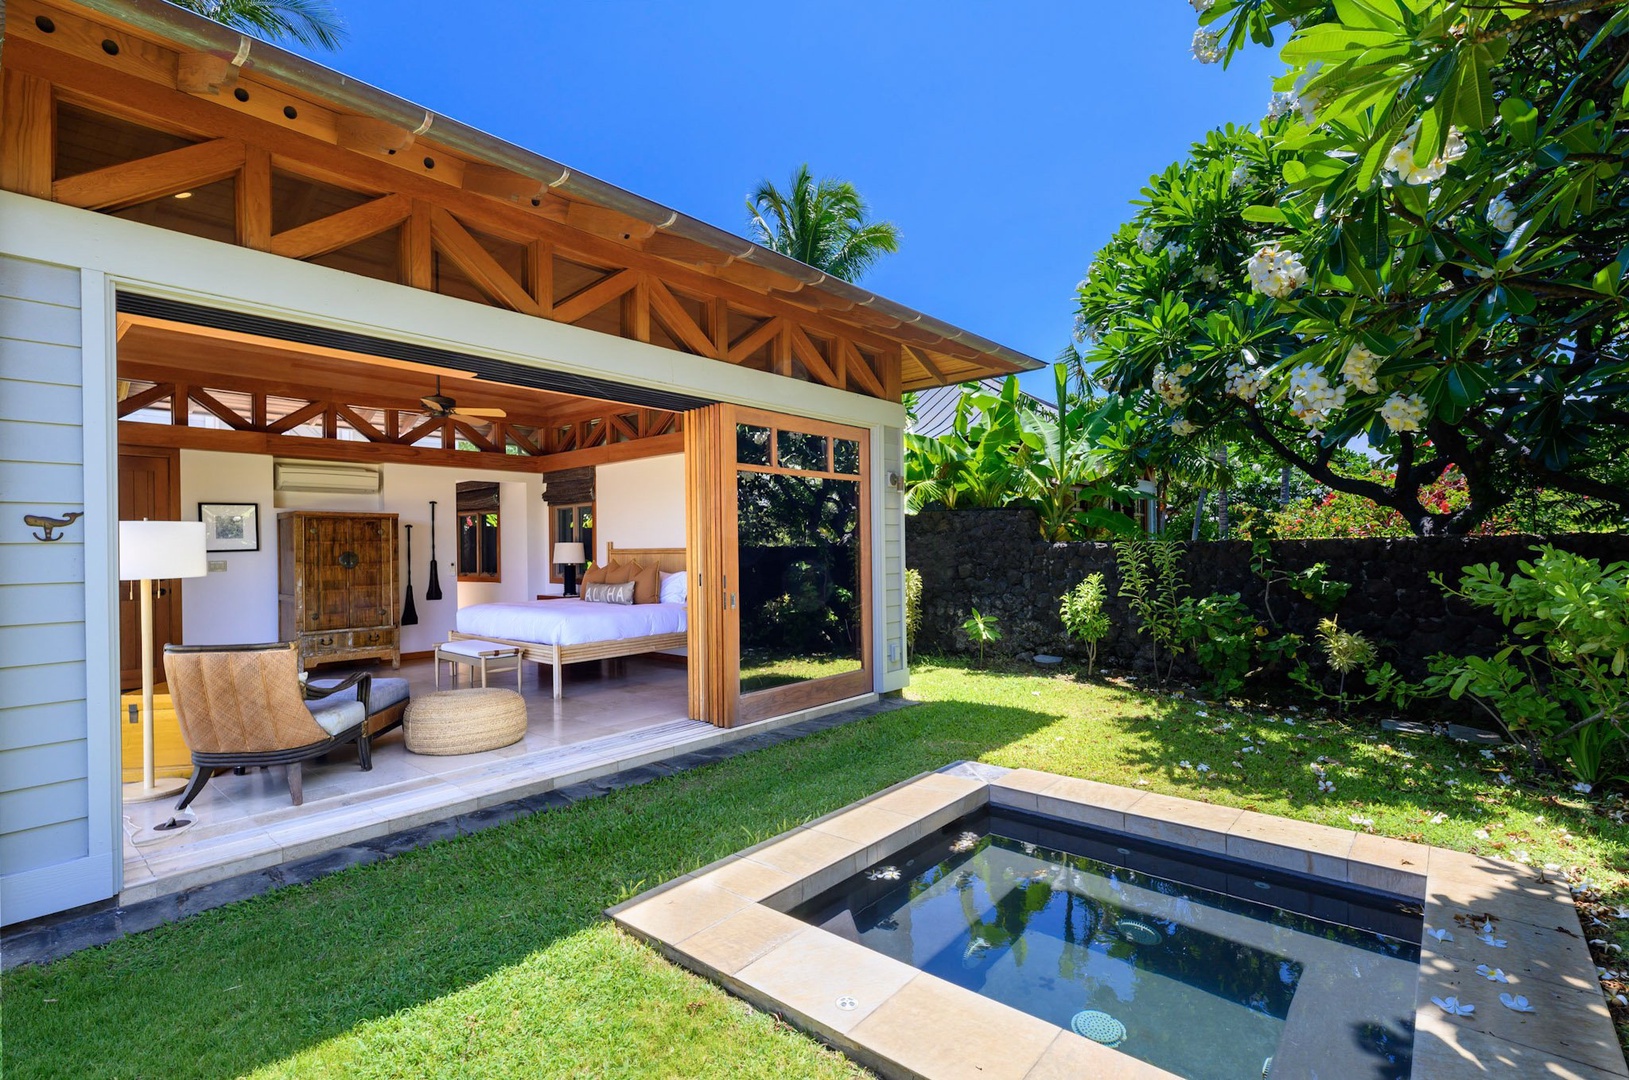 Kamuela Vacation Rentals, 3BD Na Hale 3 at Pauoa Beach Club at Mauna Lani Resort - The primary suite opens directly to the pool for seamless indoor-outdoor living.